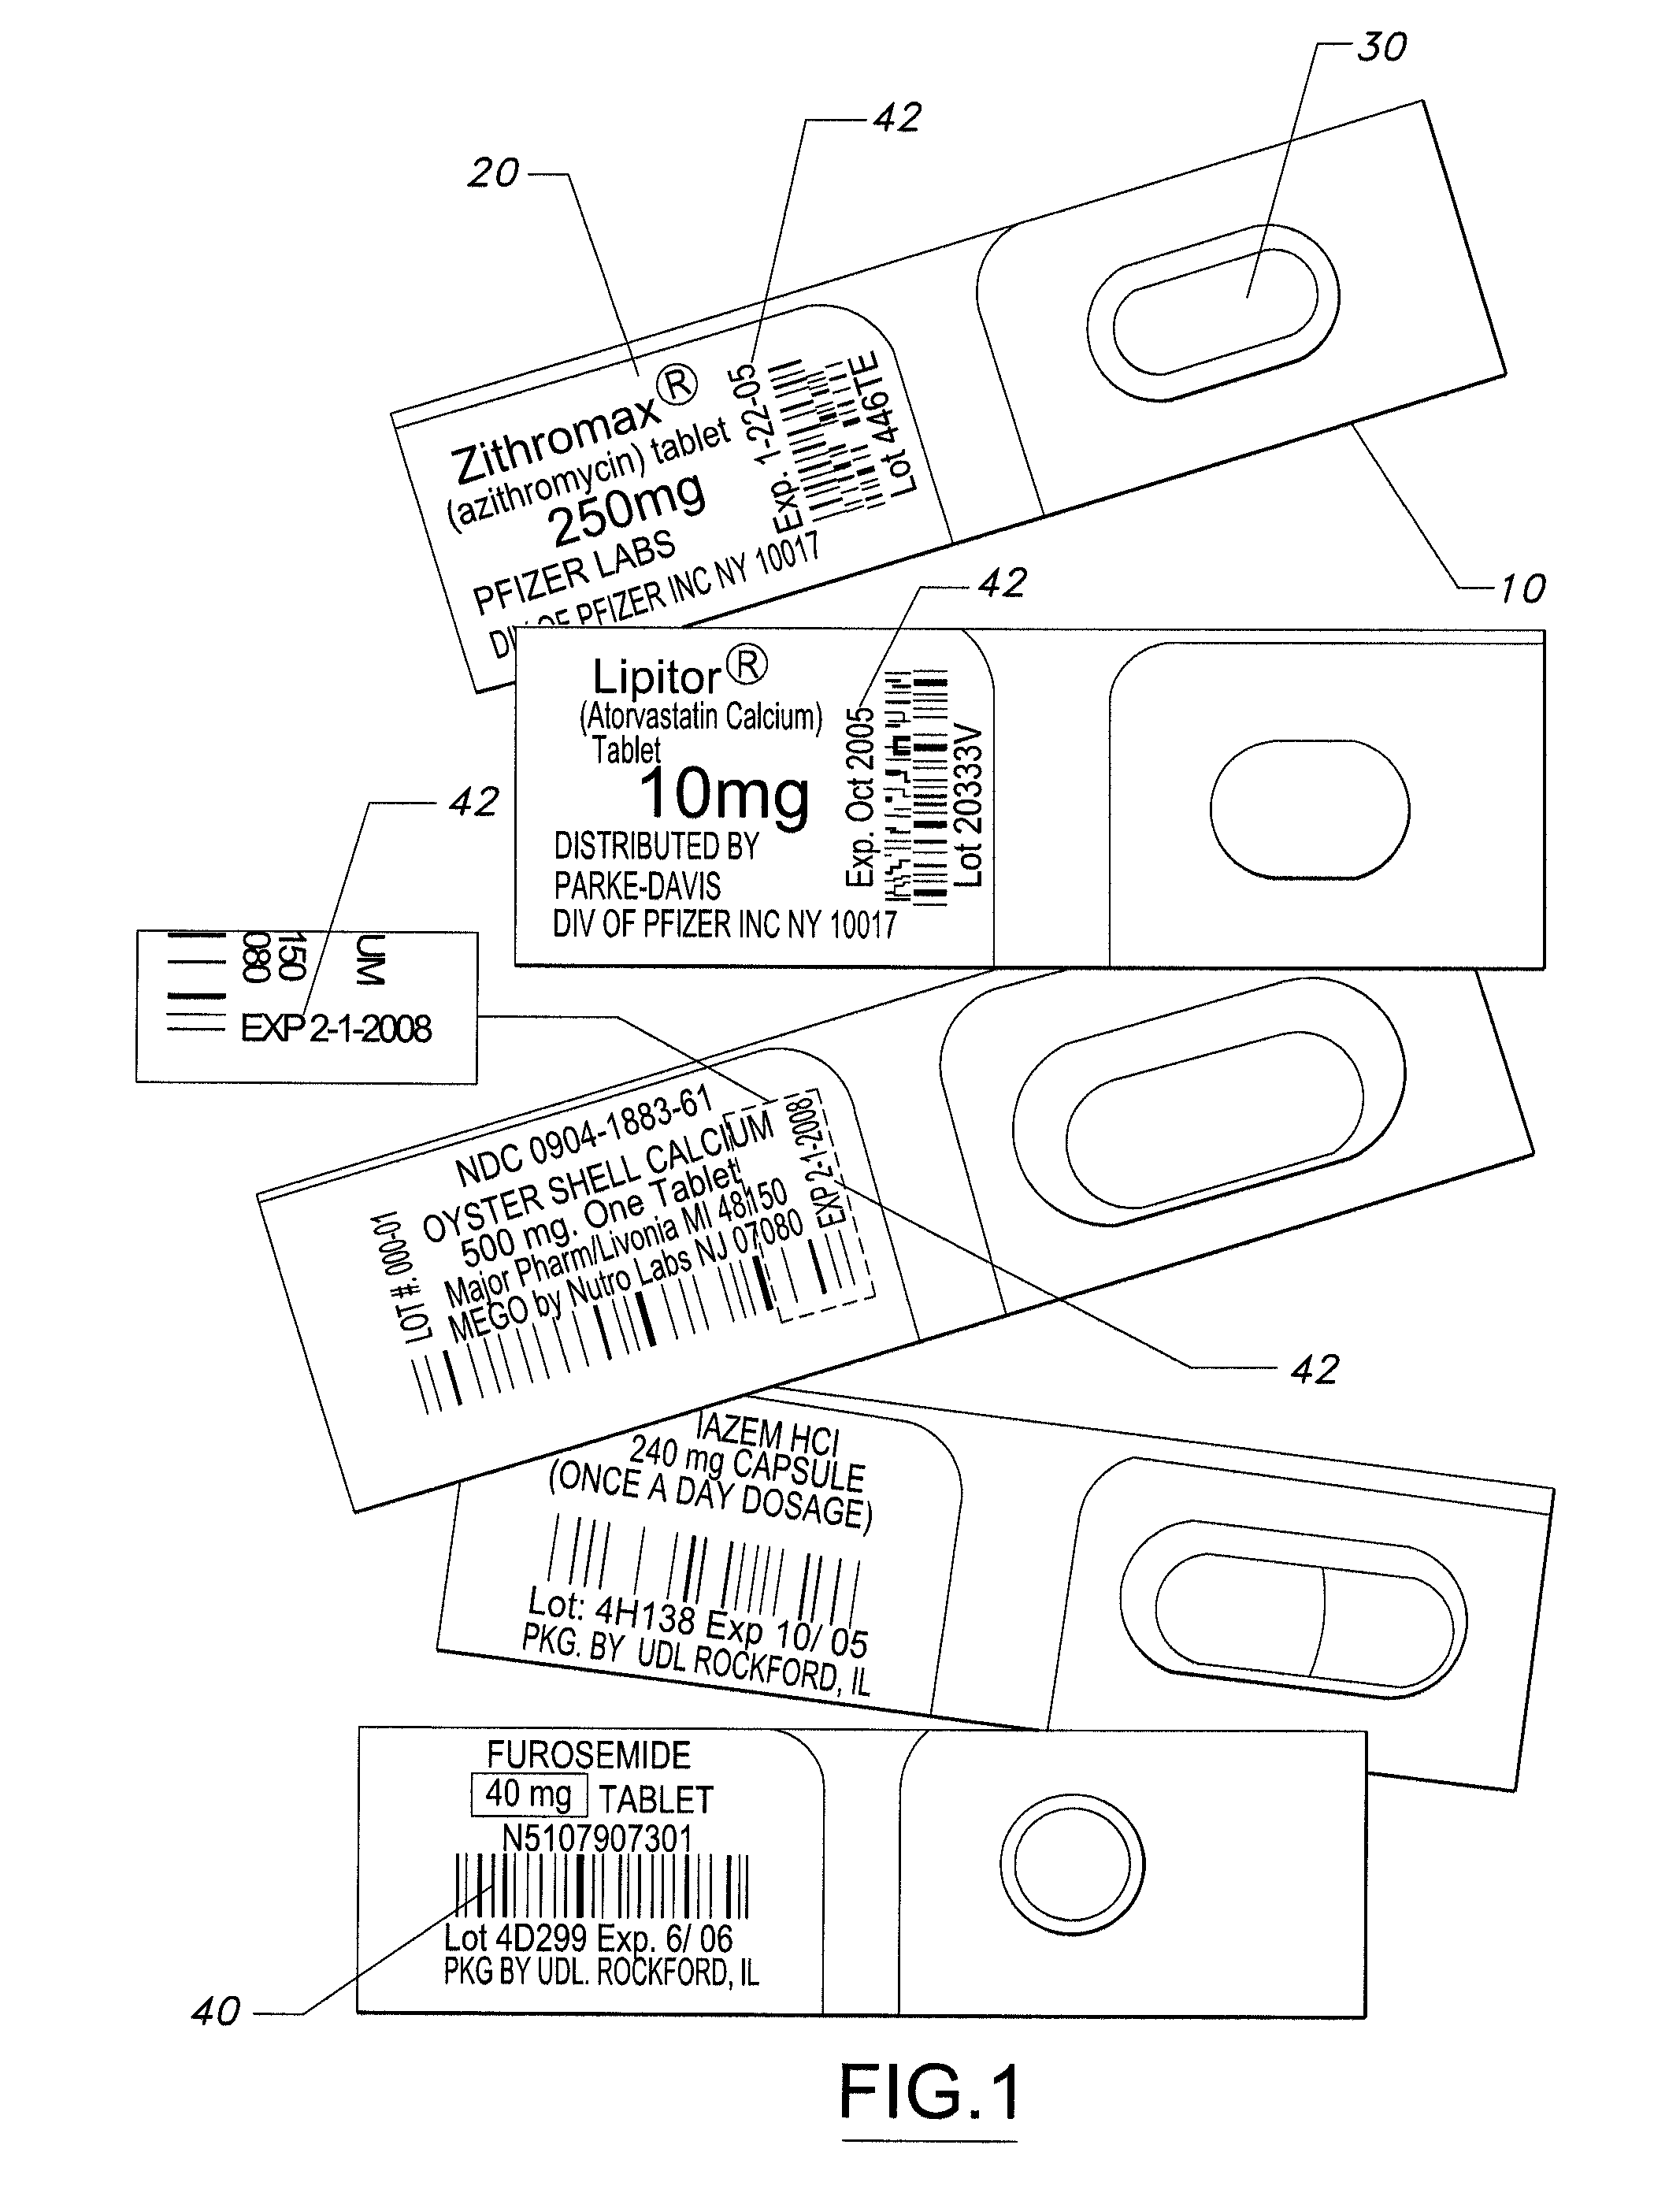 System, method, apparatus and computer program product for capturing human-readable text displayed on a unit dose package